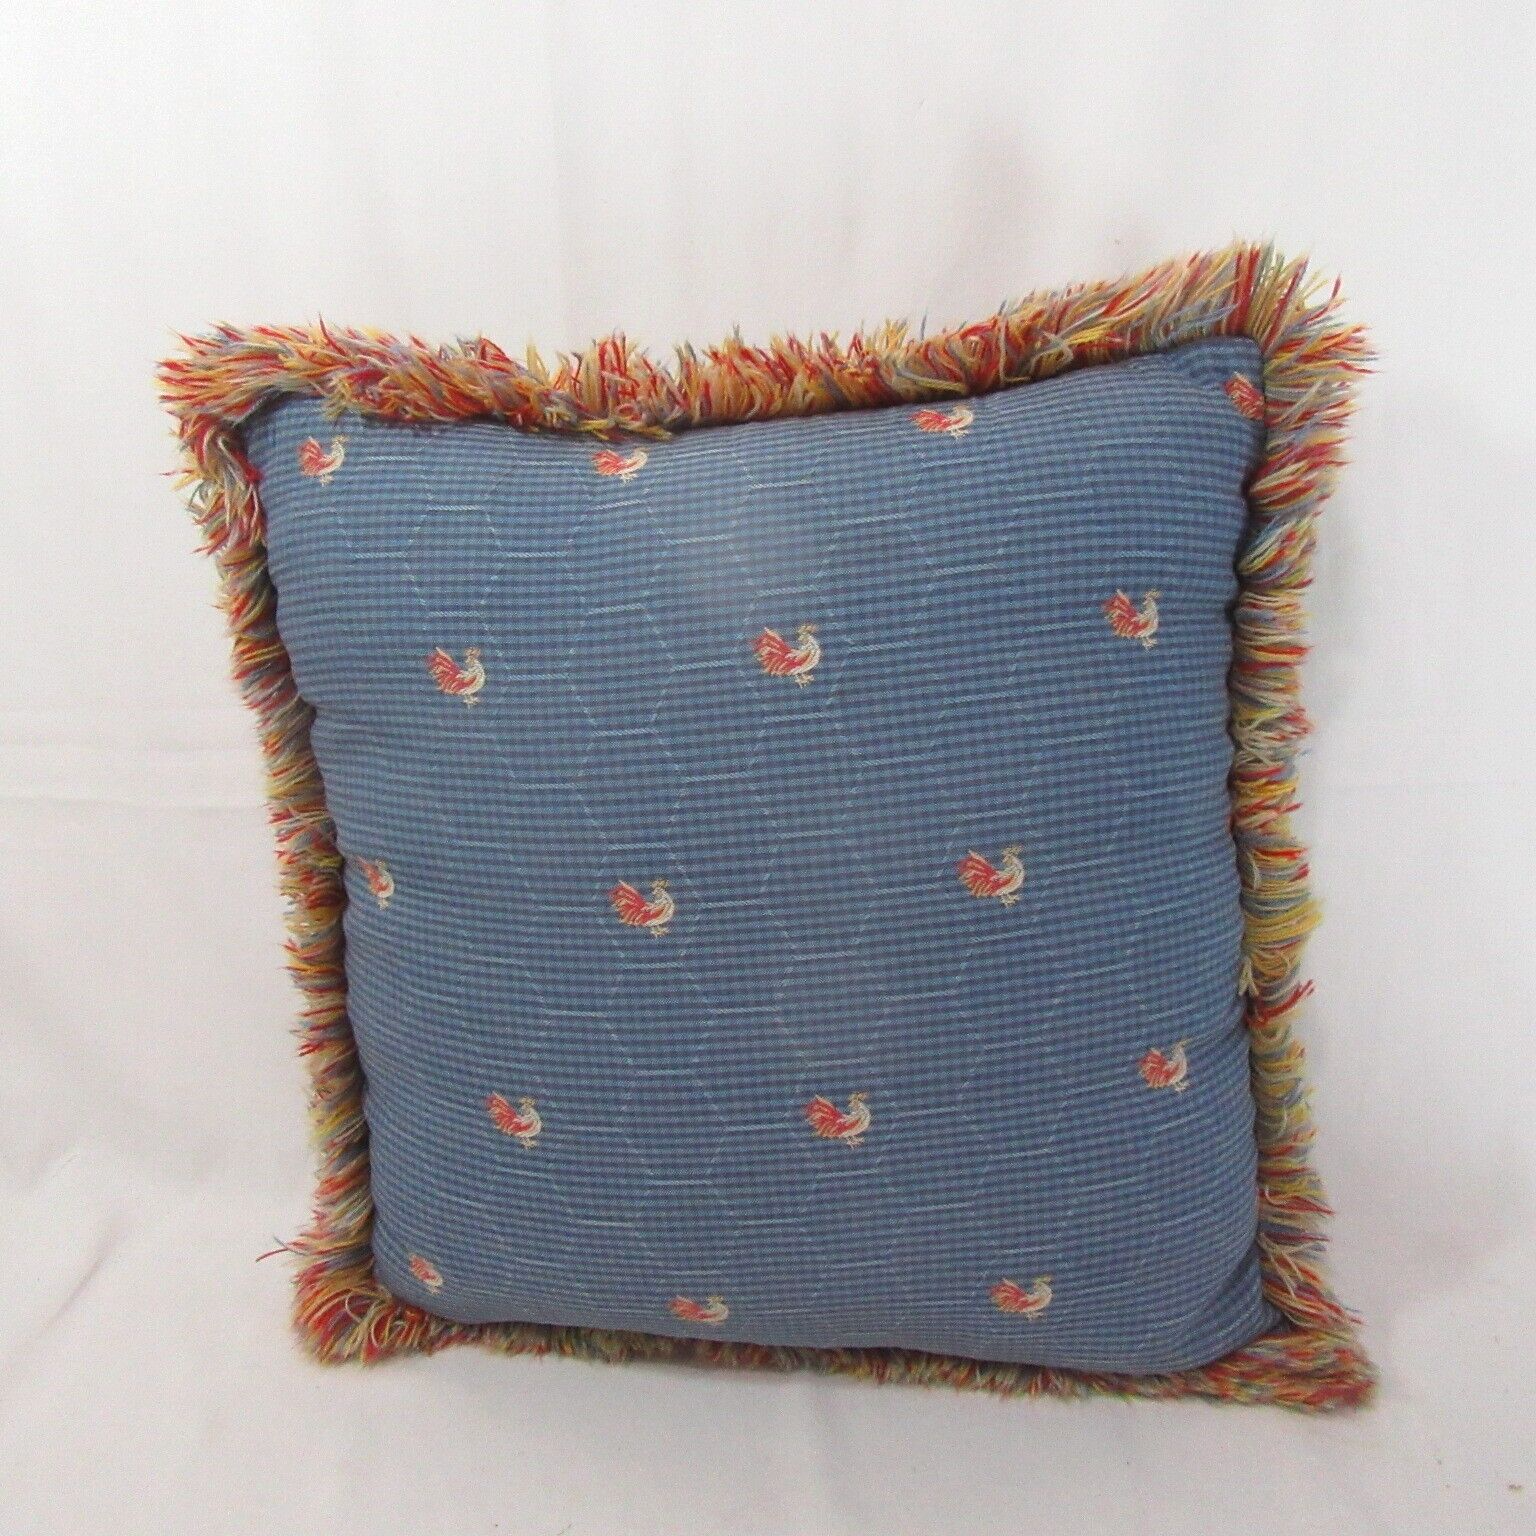 Waverly Chicken Wire Rooster Embroidered Blue Fringed 16-inch Square Pillow - $39.00